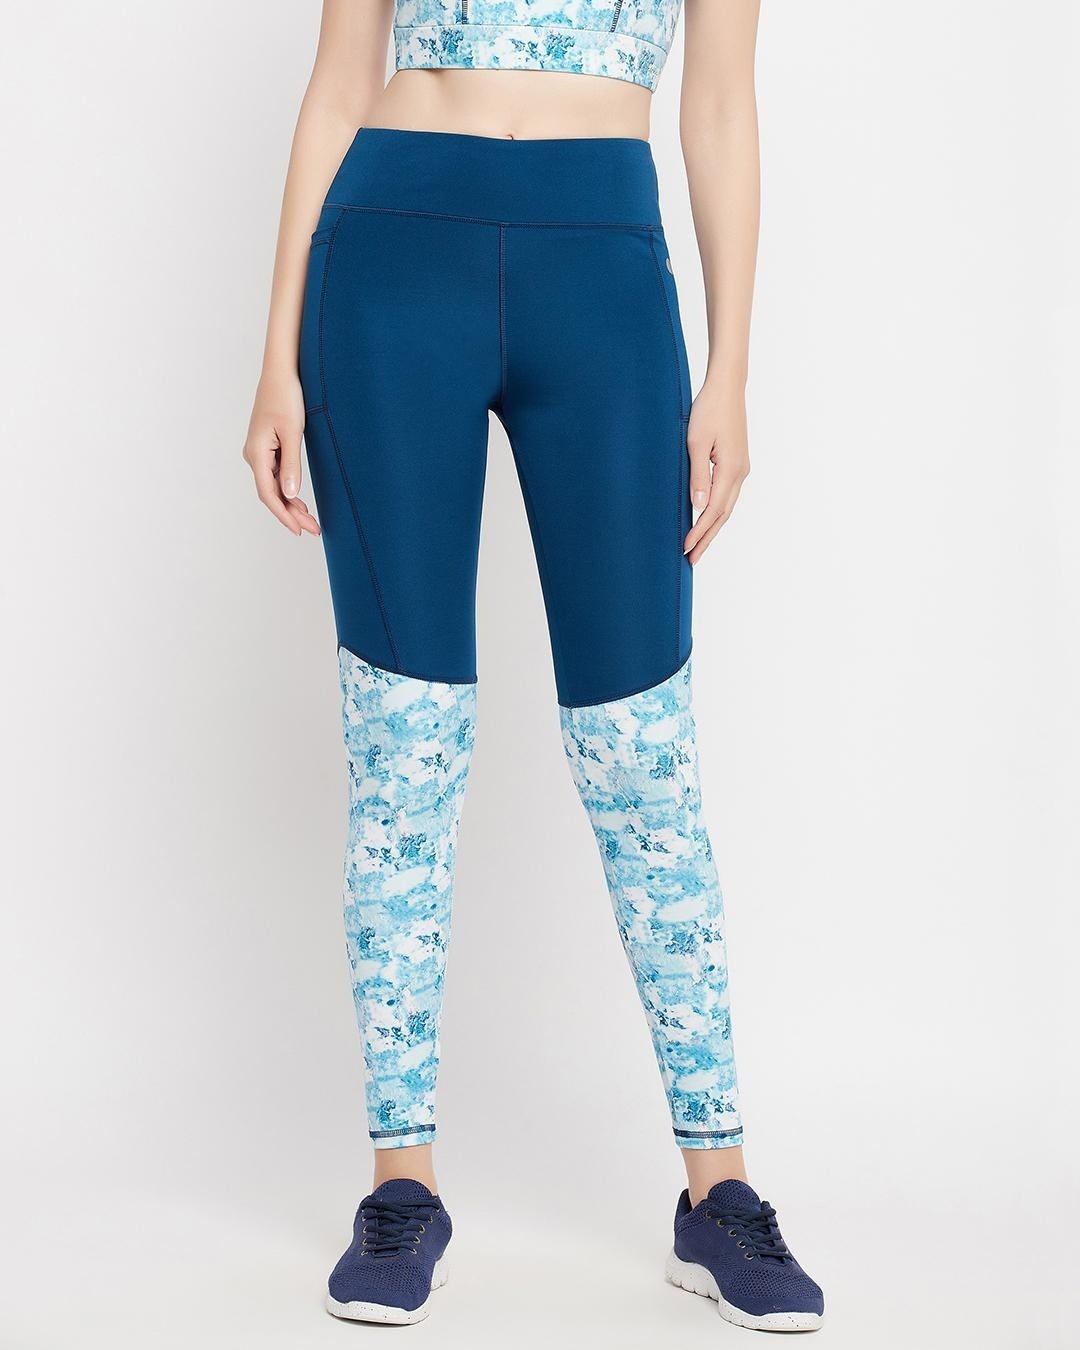 Buy Gym/Sports Printed Activewear Tights with Mesh Insert Online India,  Best Prices, COD - Clovia - AB0028P08